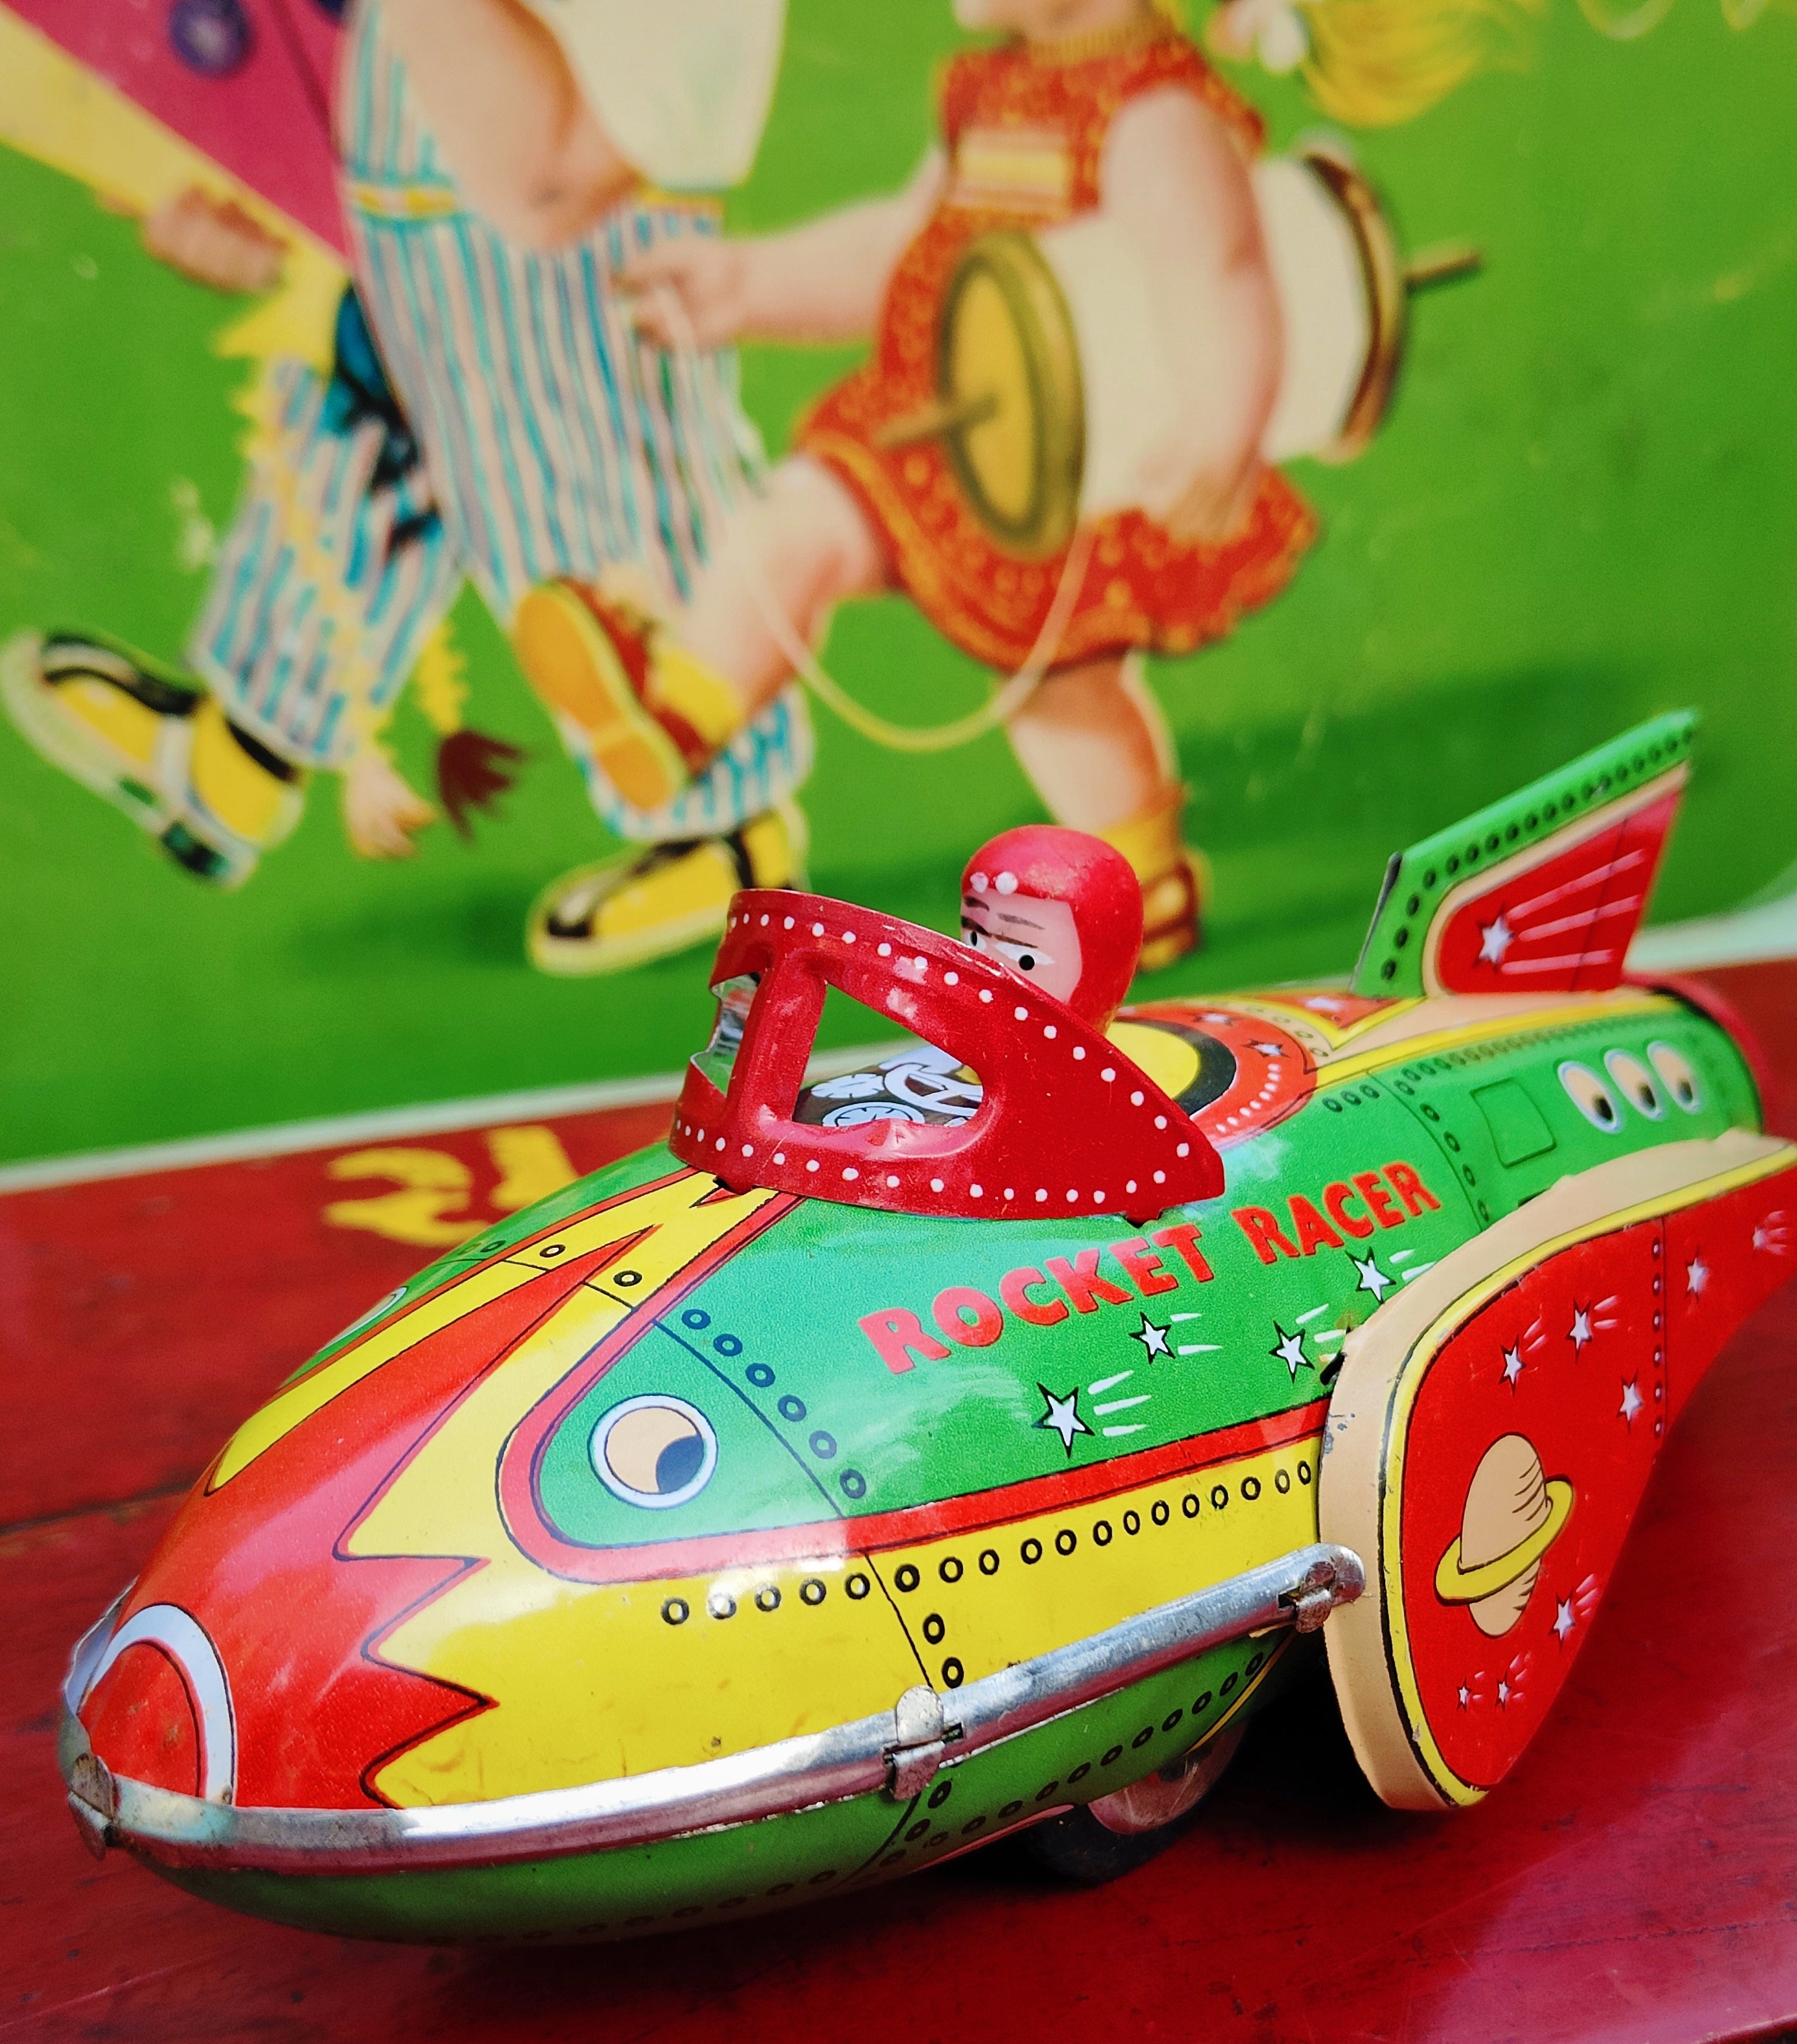 Push around with robot clicks! this super cool Rocket Racer with bonkers looking pilot!

Printed tin and plastic 

20cm x 9cm x 9cm

Not suitable as children's toy

